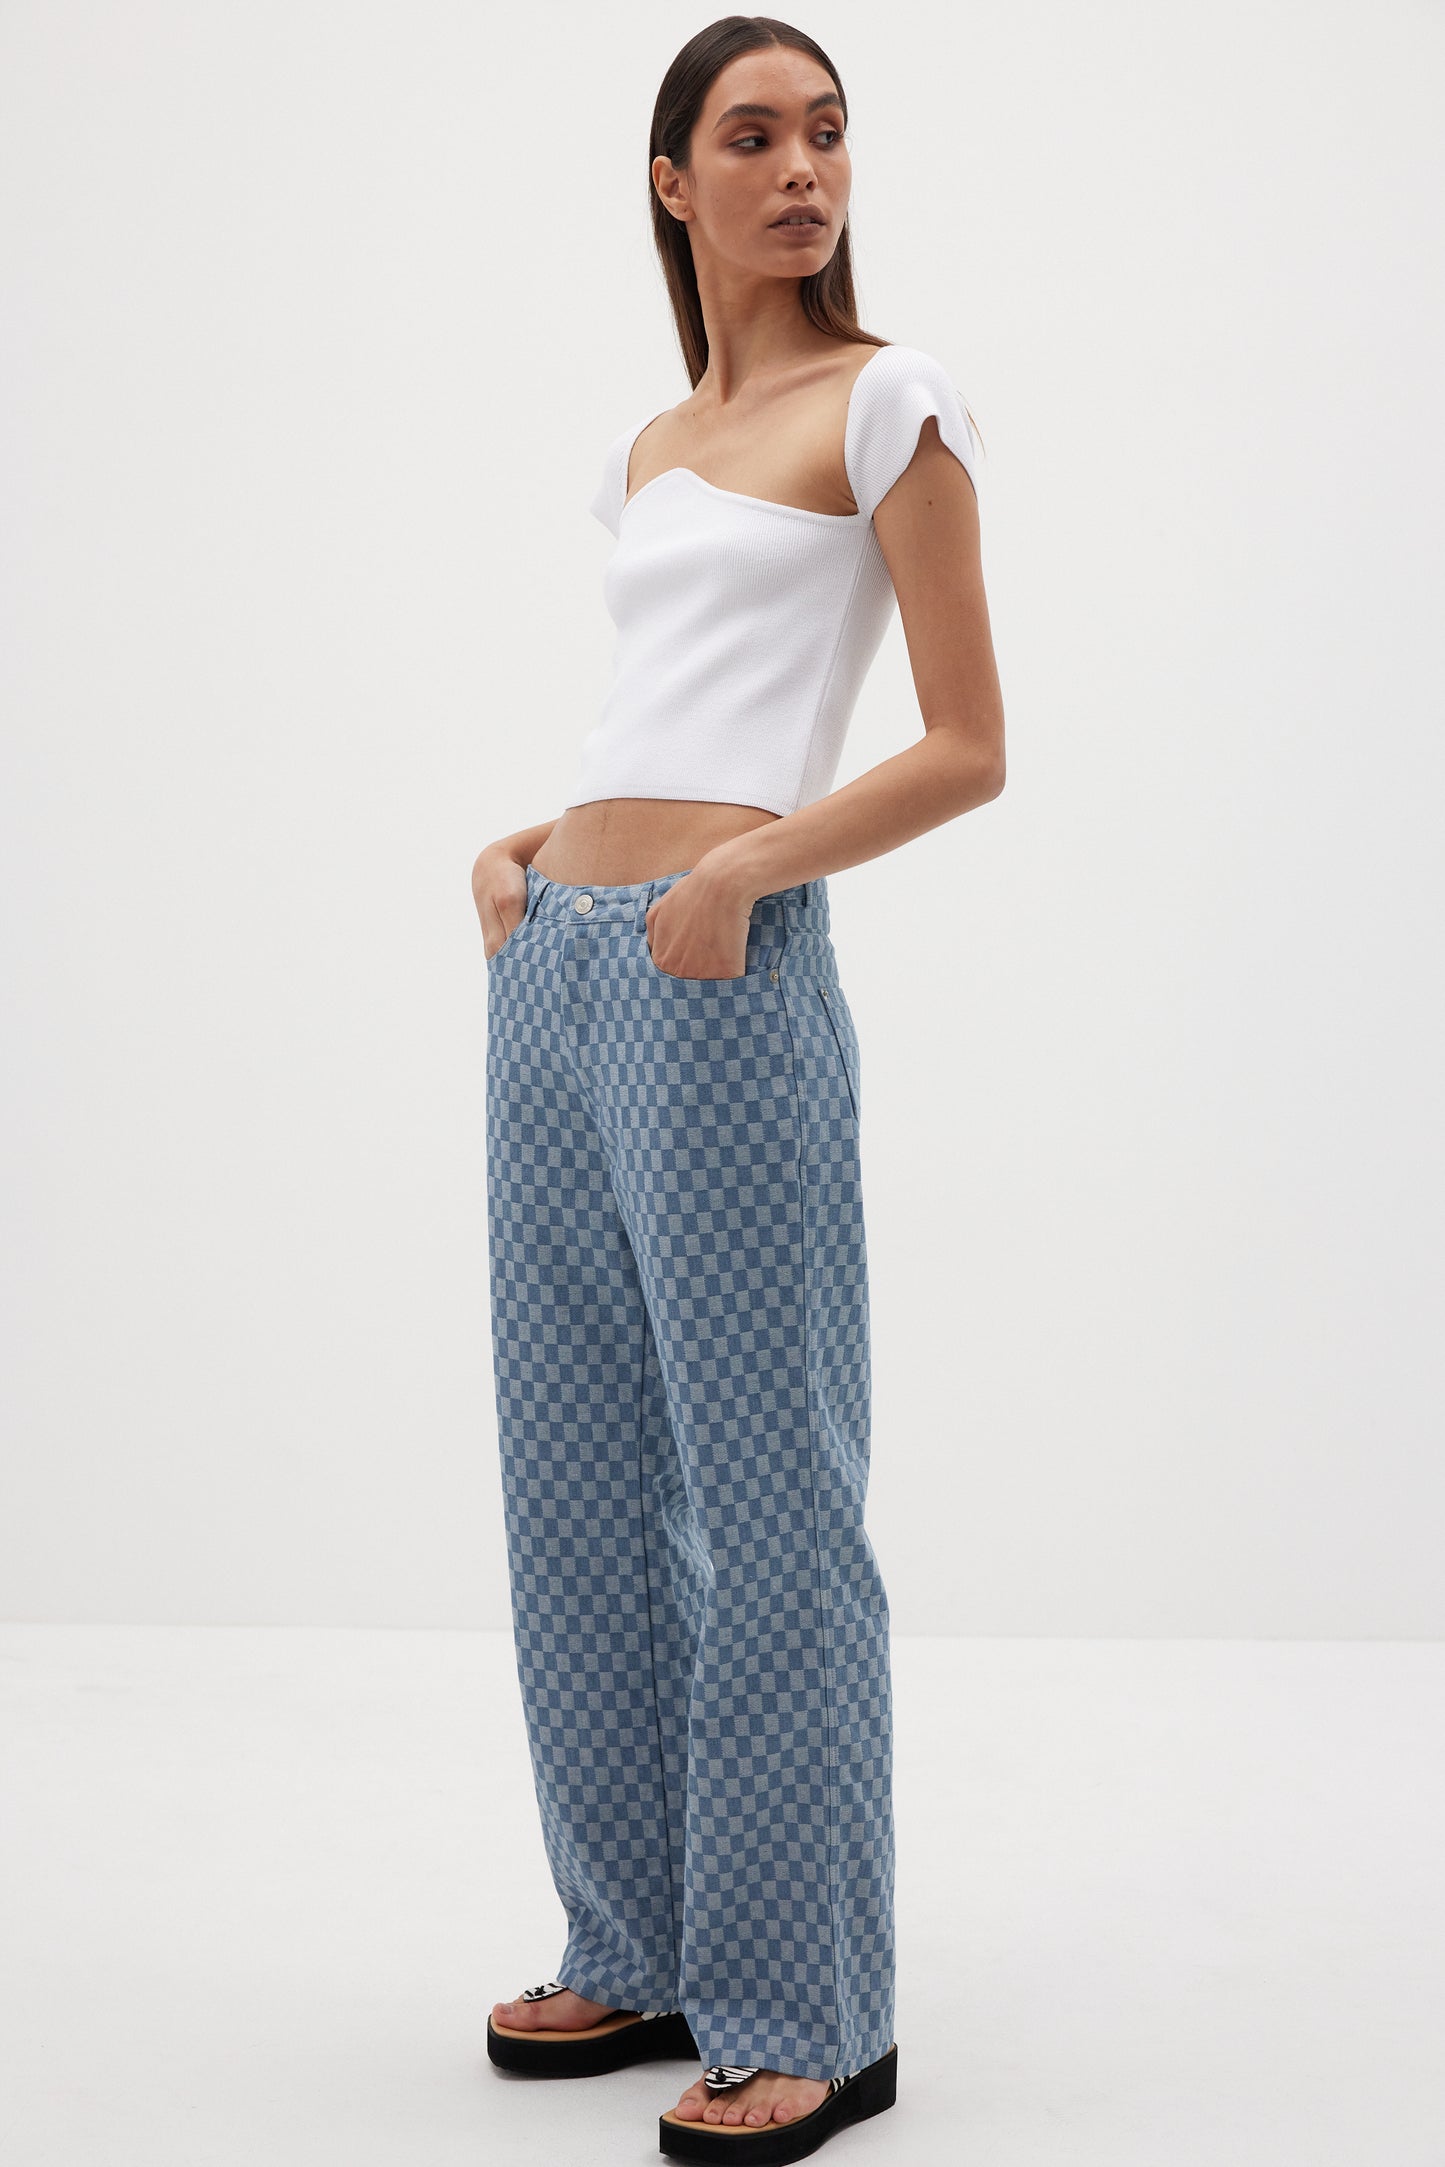 Slouchy Checkerboard Jeans, Light Blue